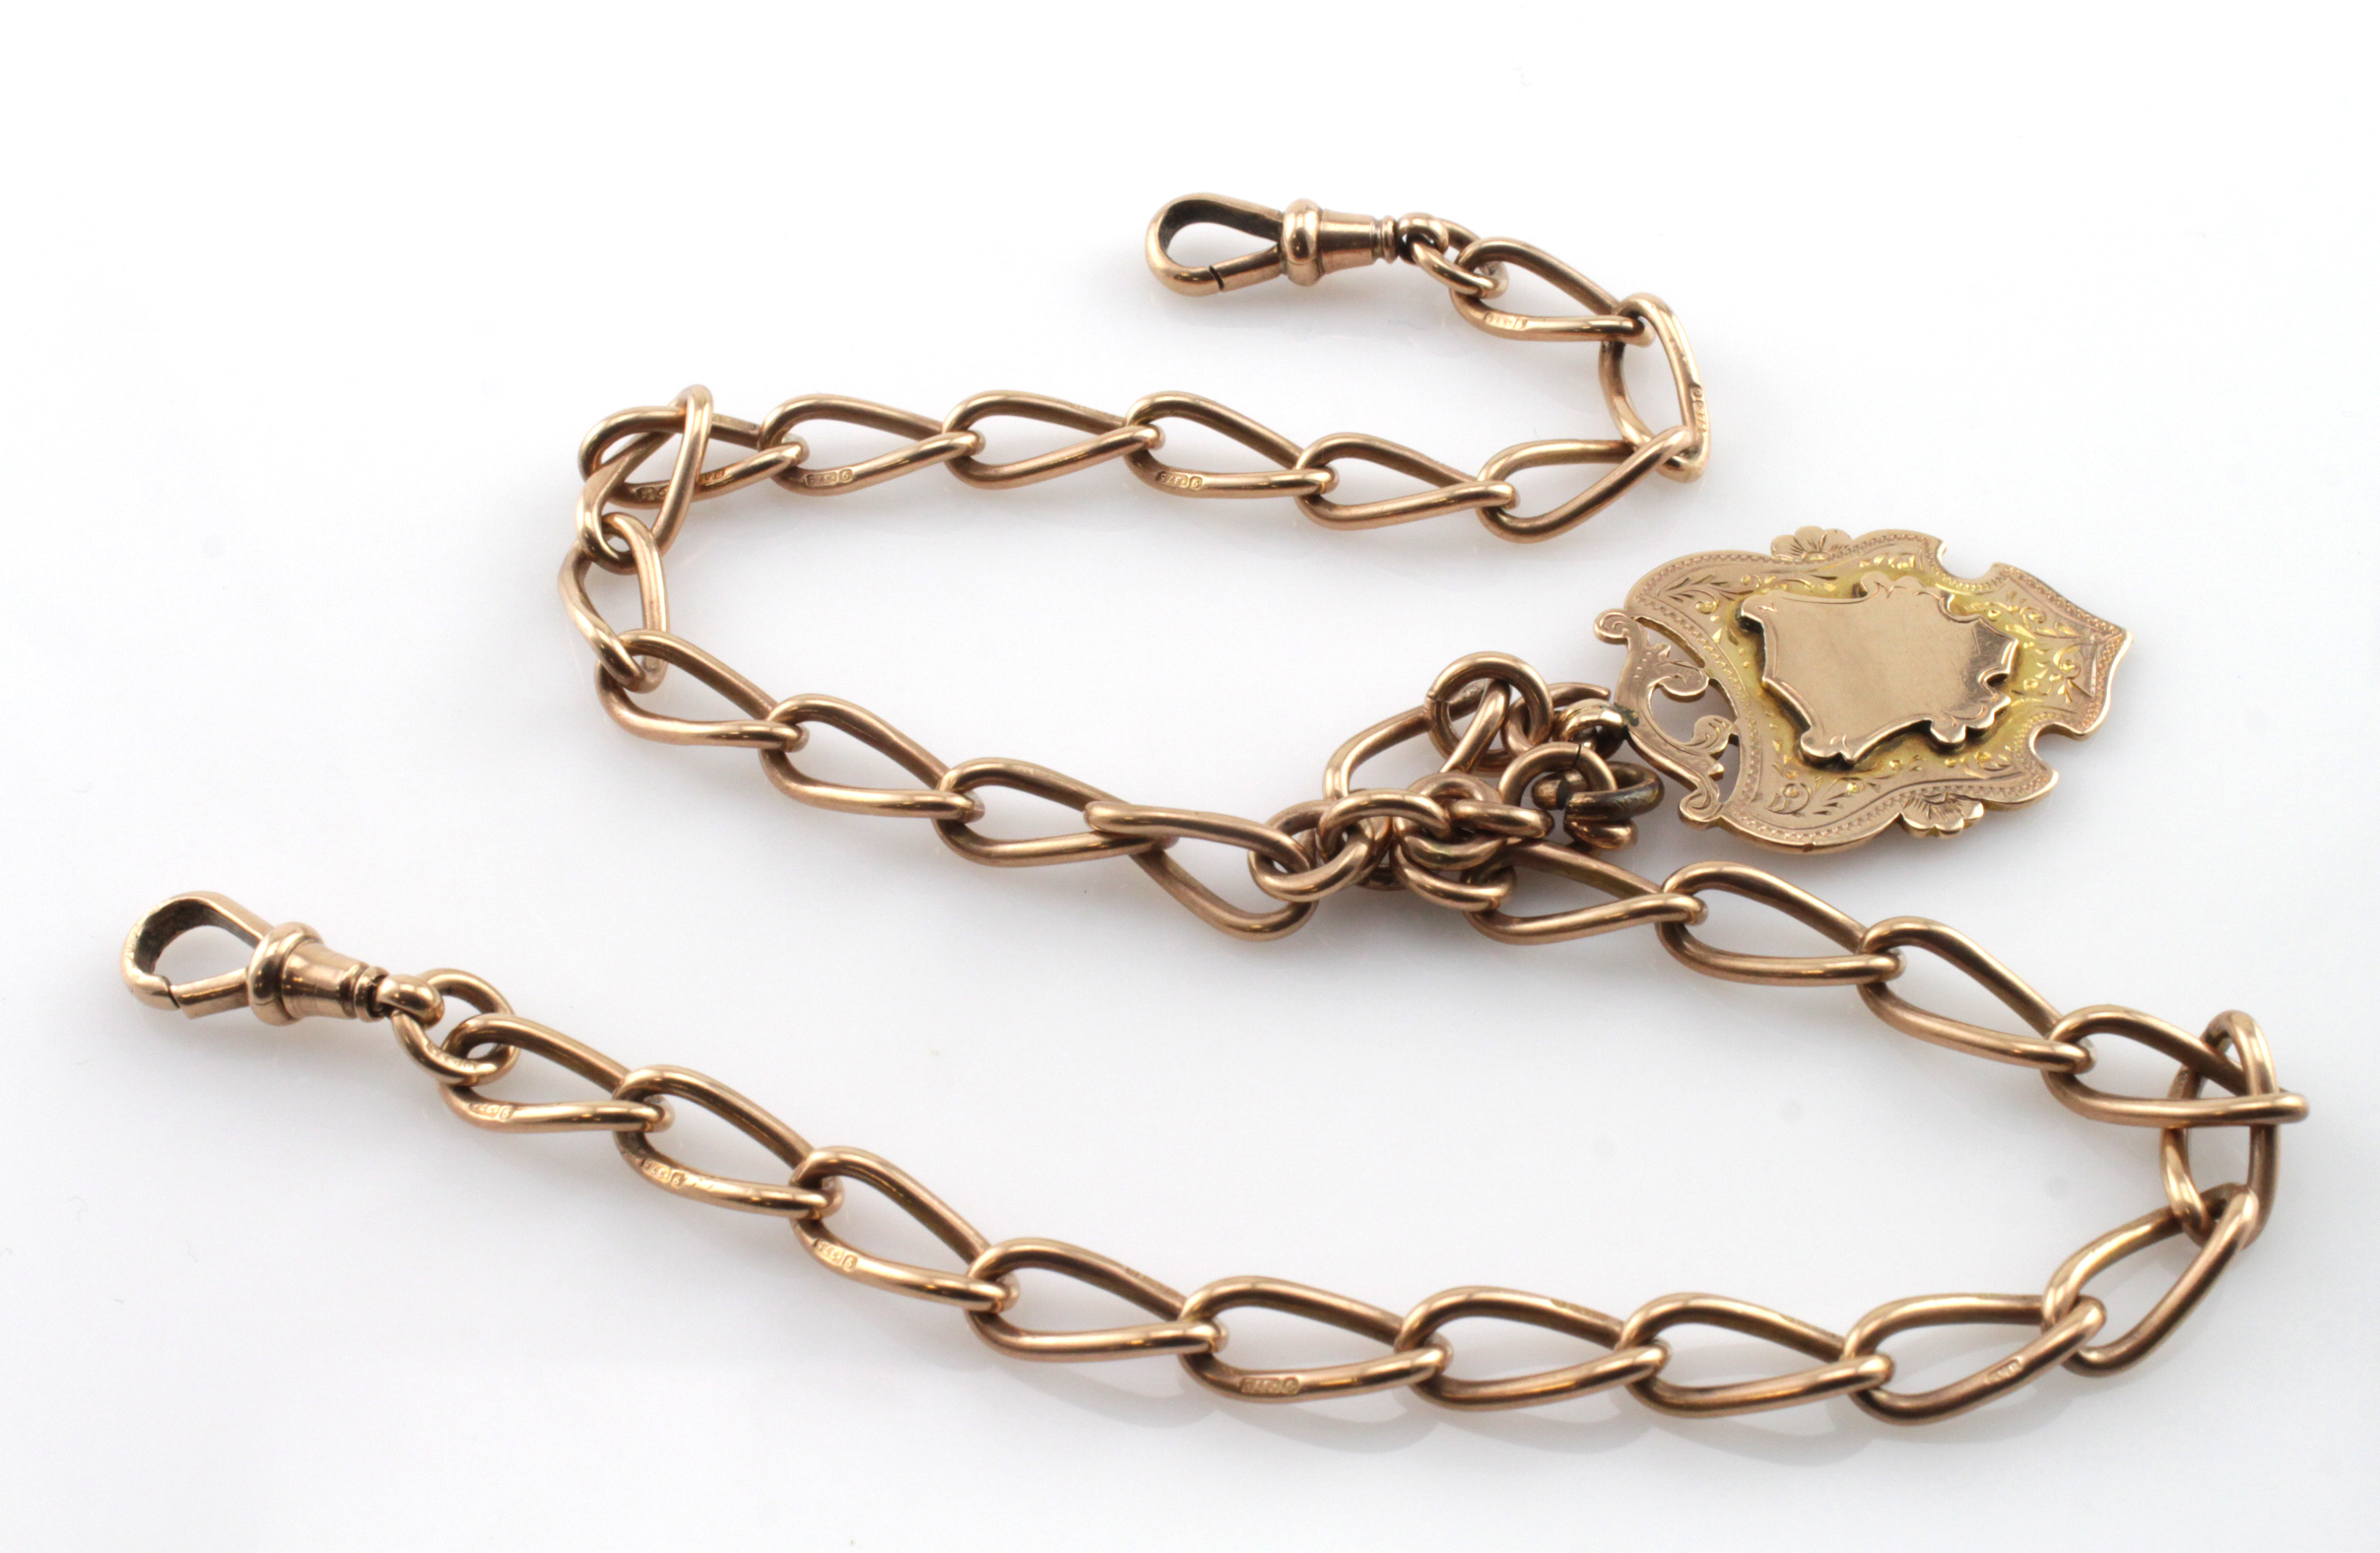 9ct Gold Albert Chain with 9ct Fob and Dog clips weight 36.4g